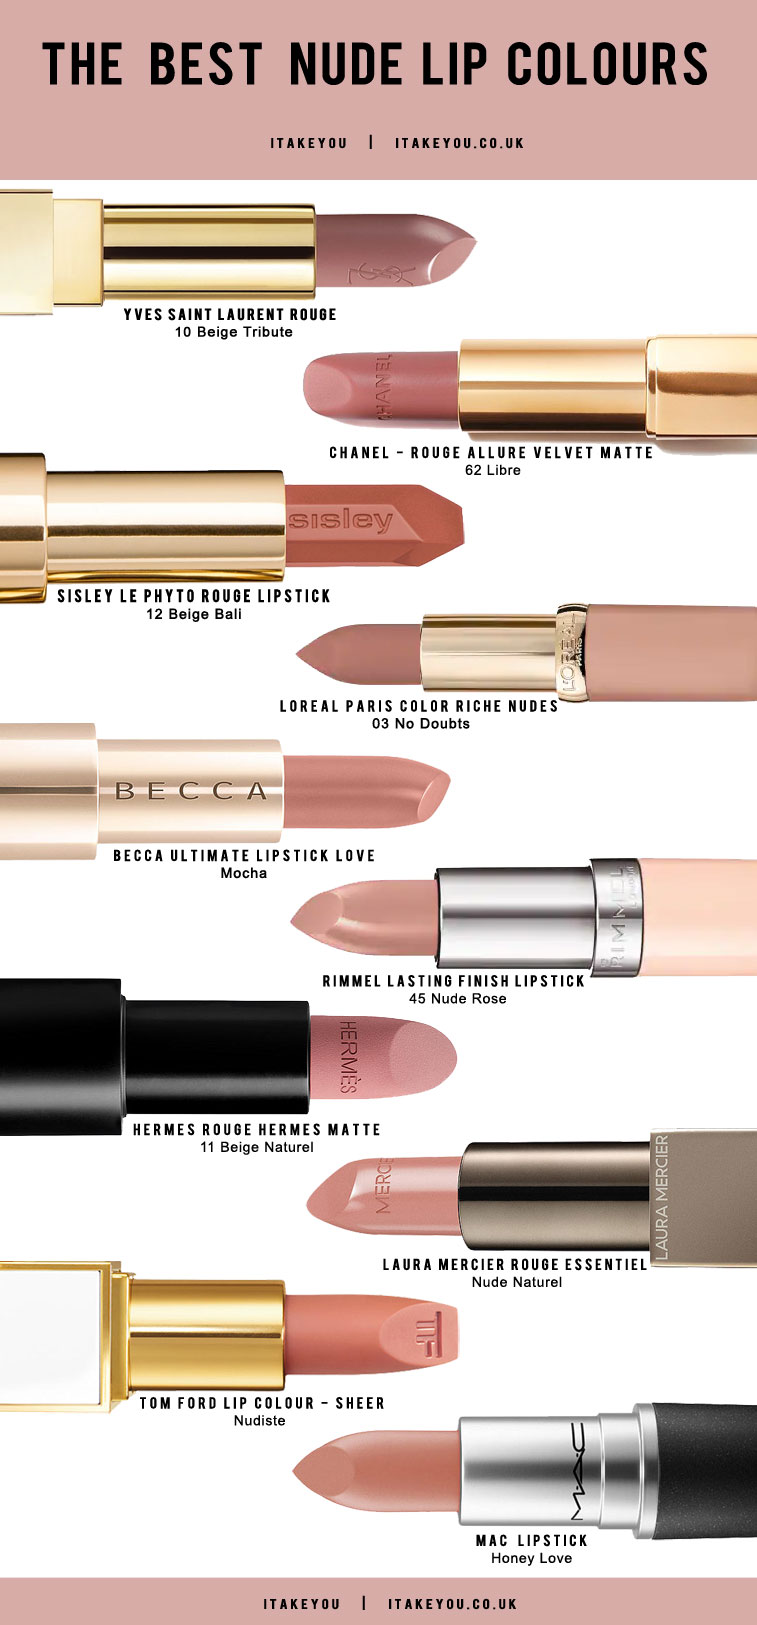 10 The Best Nude Lip Colours To Try in 2021